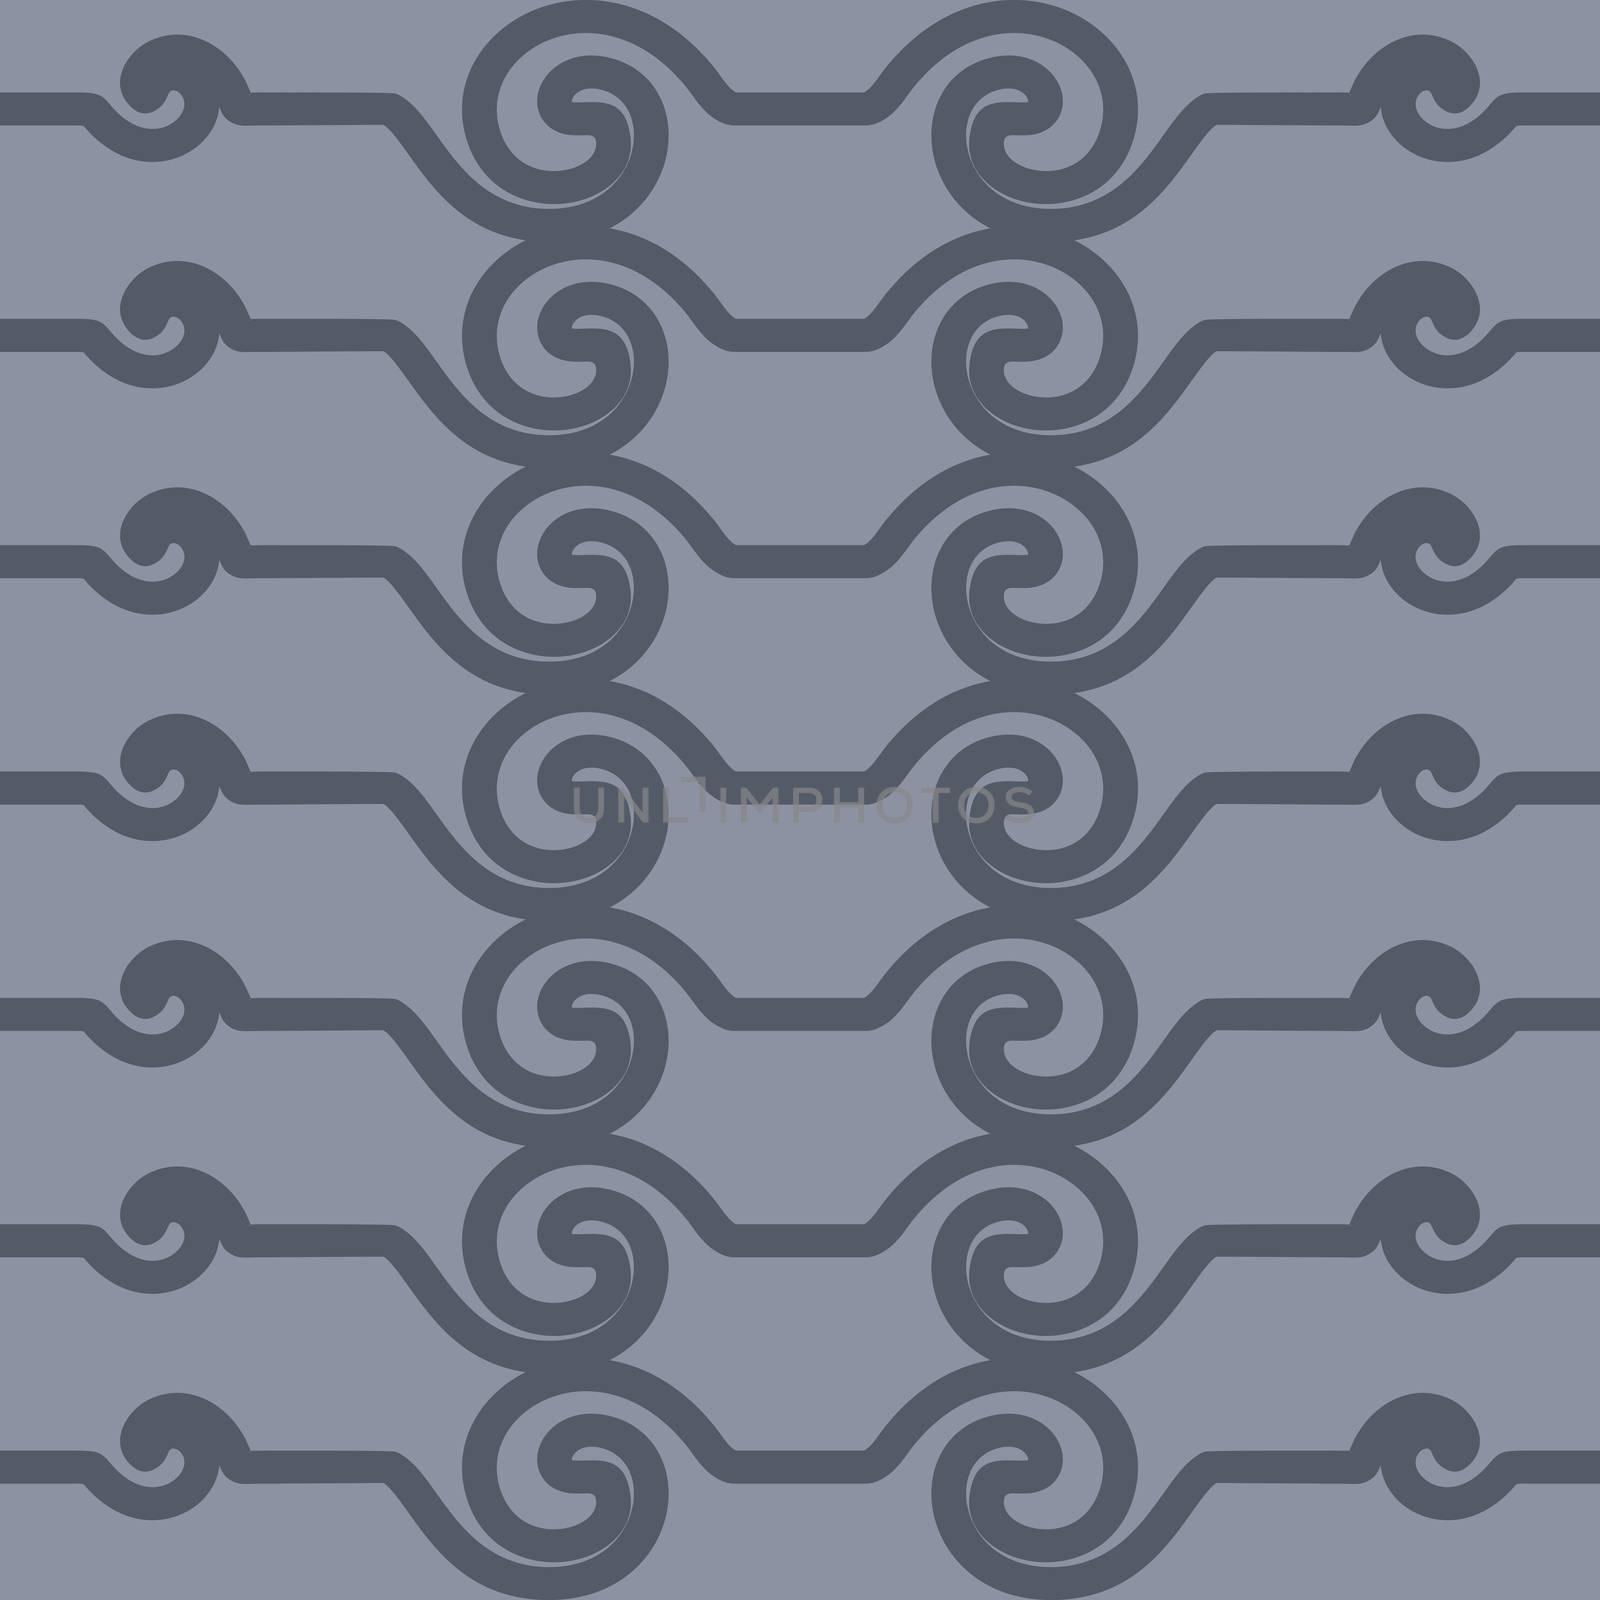 background pattern by vector1st